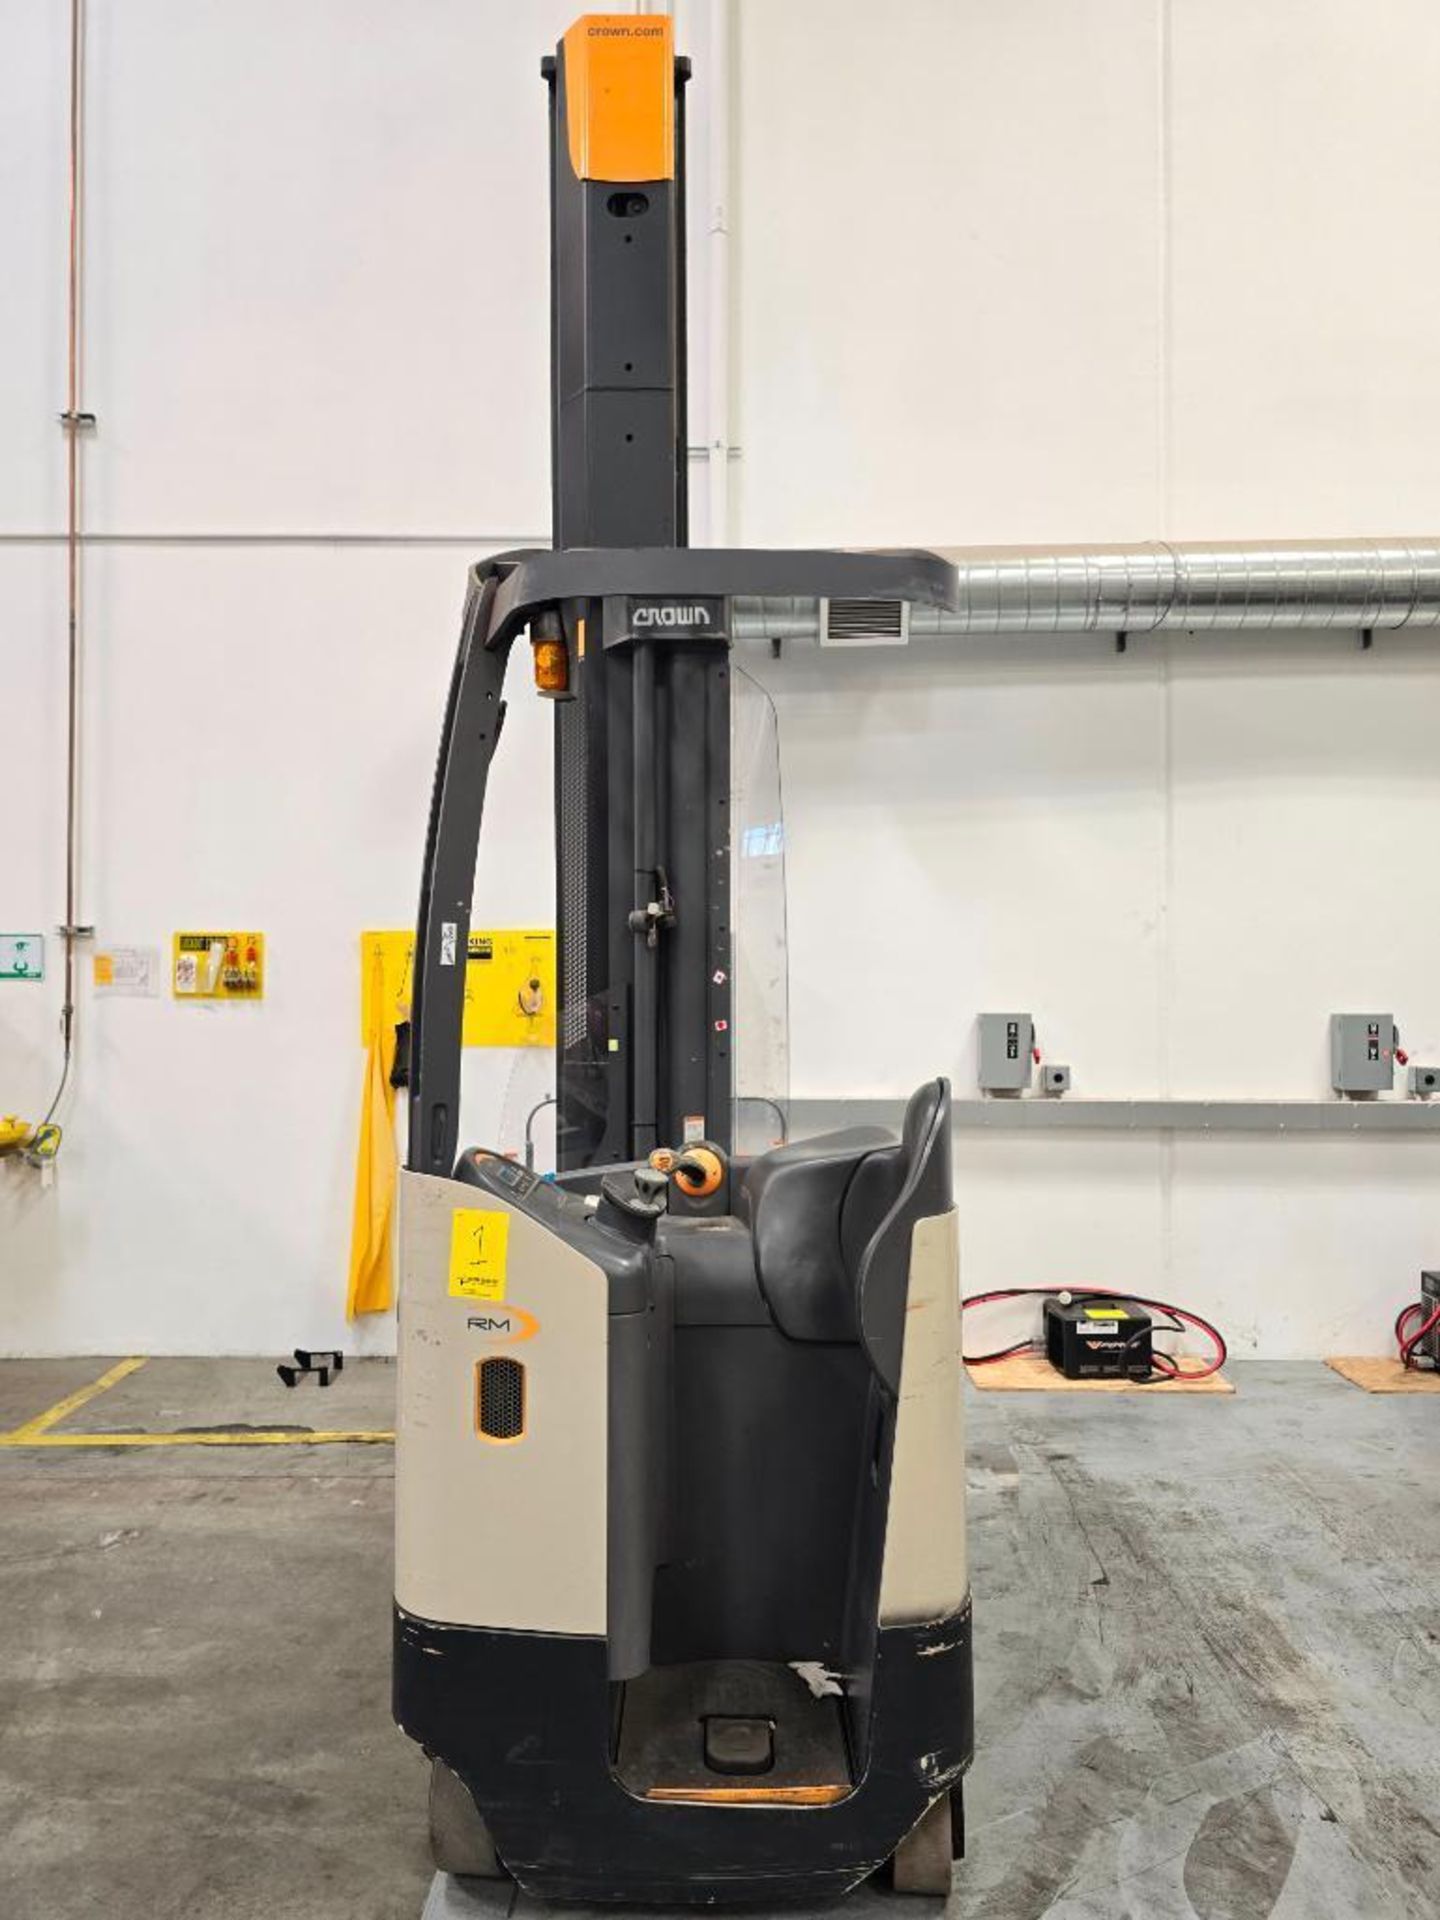 2017 Crown Monomast 4,500-LB. Capacity Reach Truck, Model: RM 6000 Series, 36-Volts, S/N: 1A486193, - Image 5 of 15